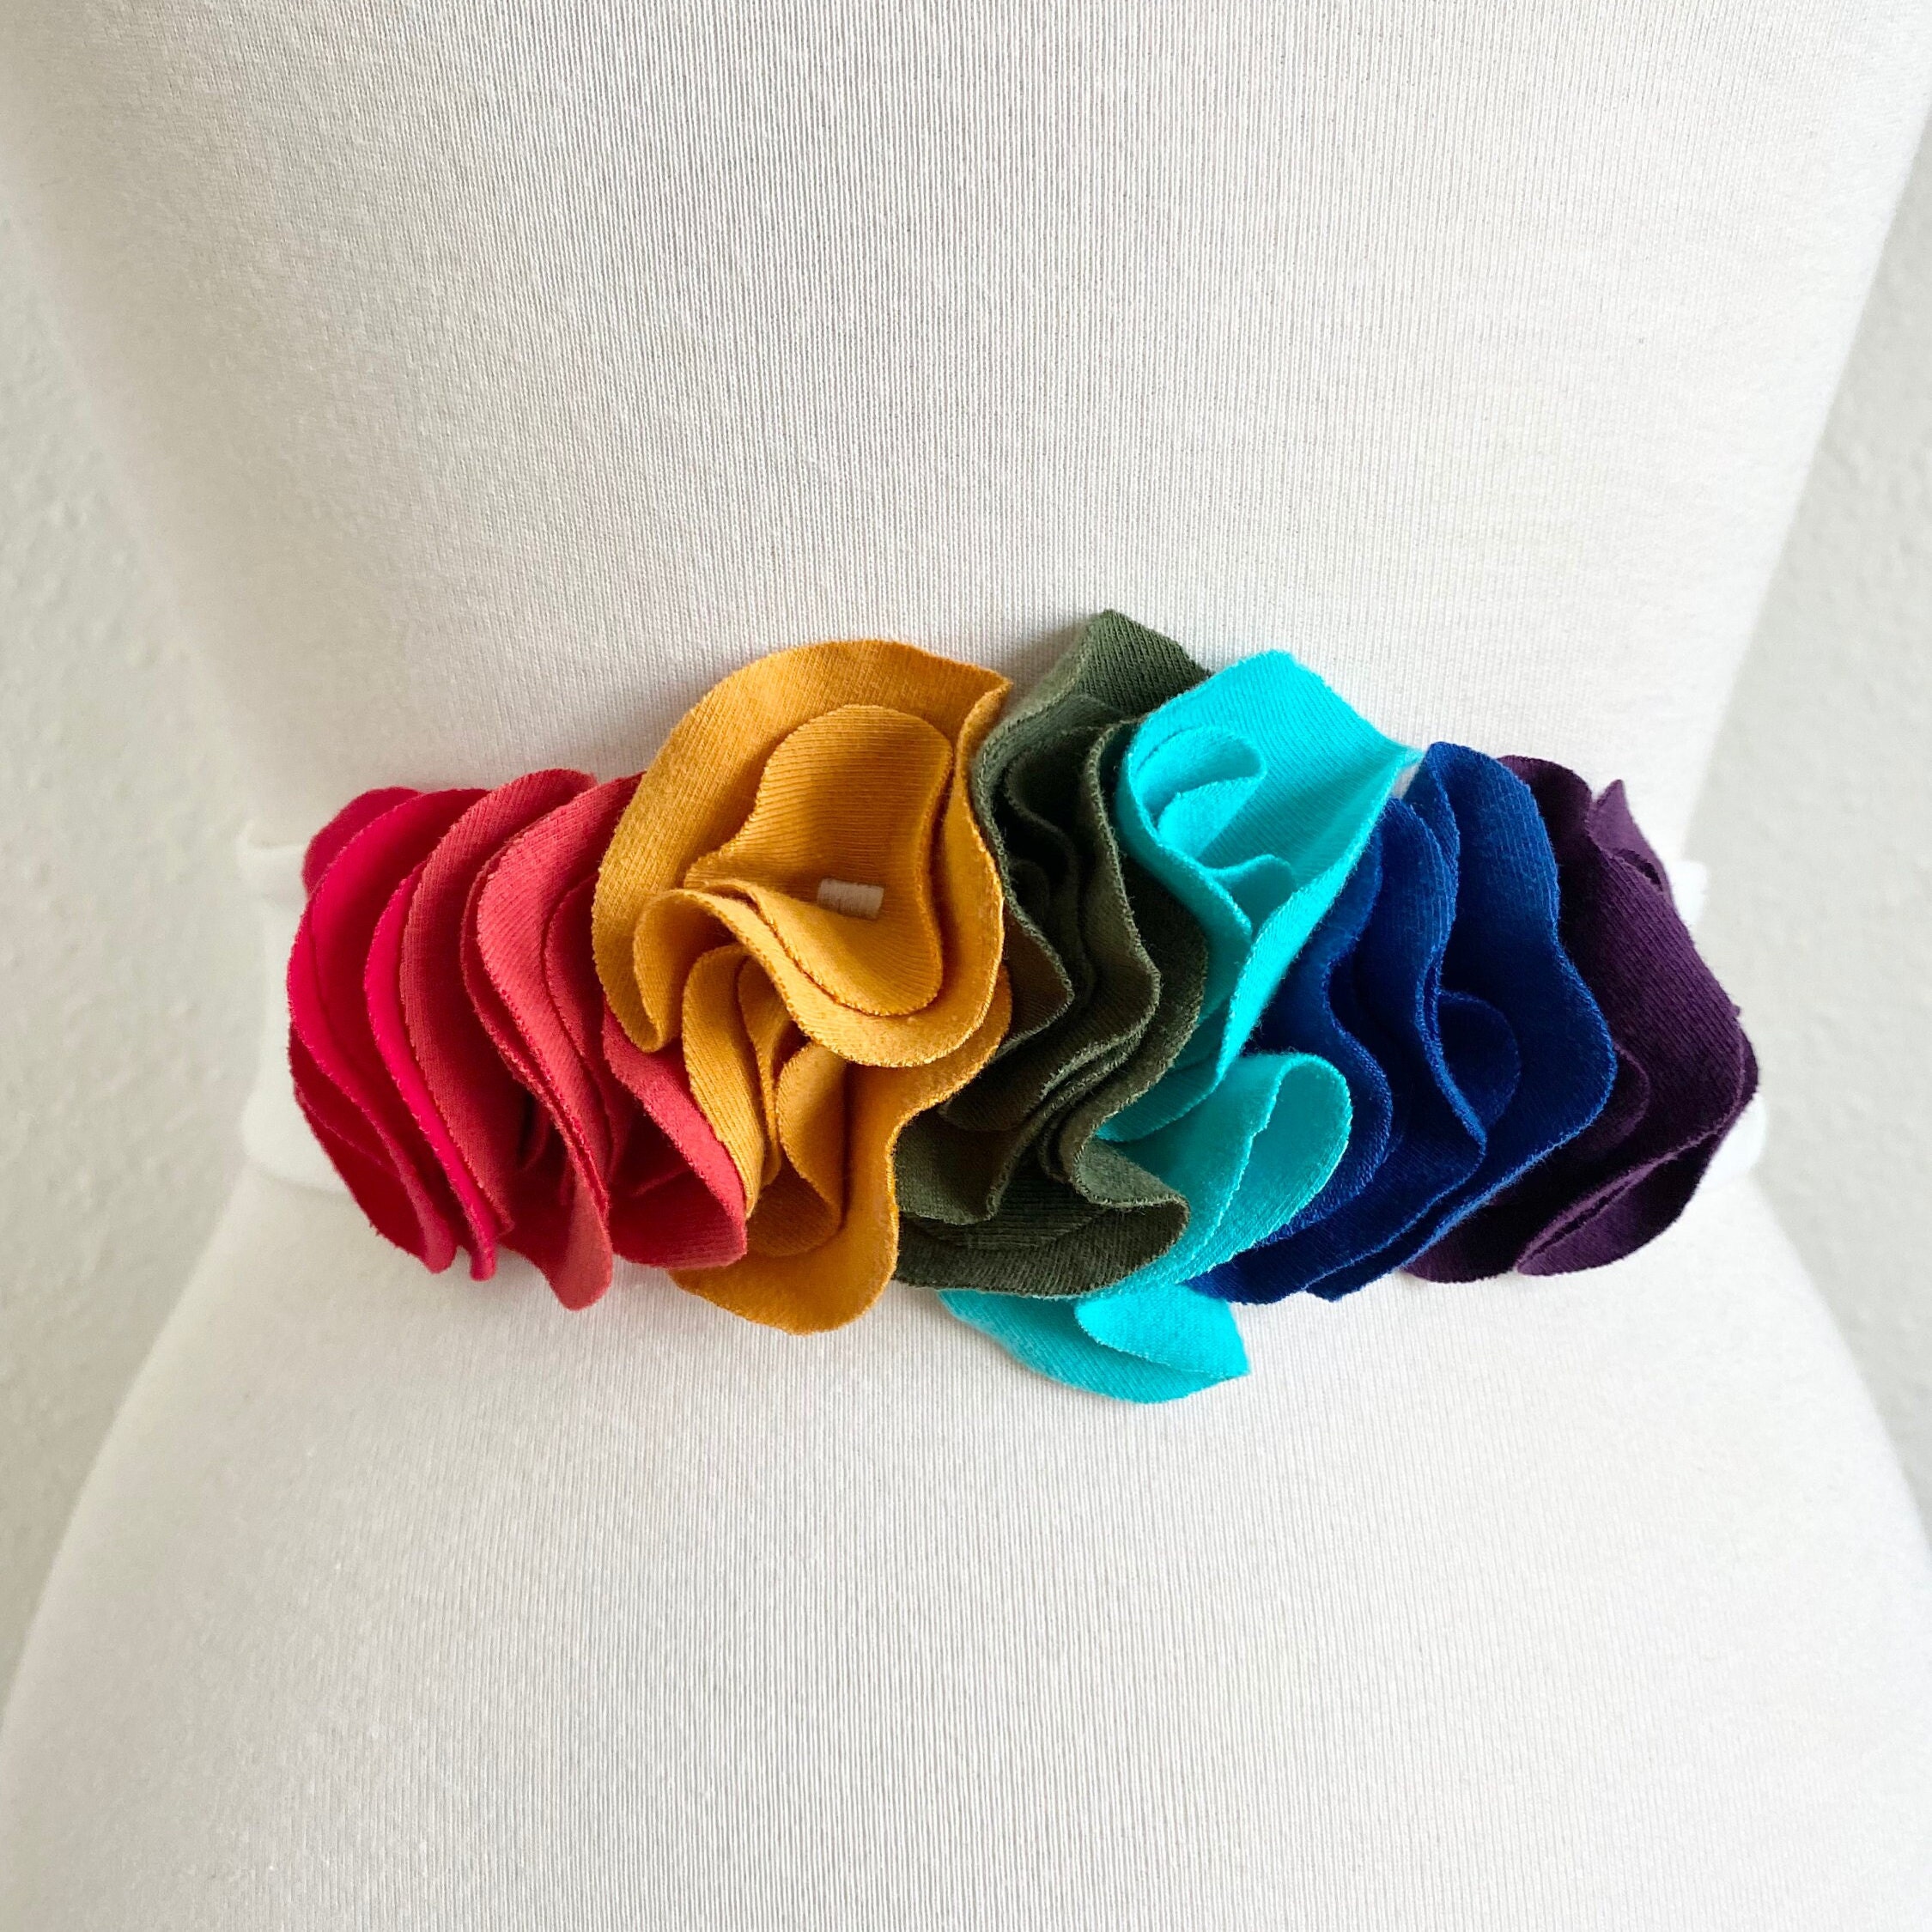 Rainbow Flower Petal Sash Stretch Cotton Belt Accessory Bridesmaid Dress  Accessories Bridal Shower Unicorn Pride Party Made to Order - Etsy